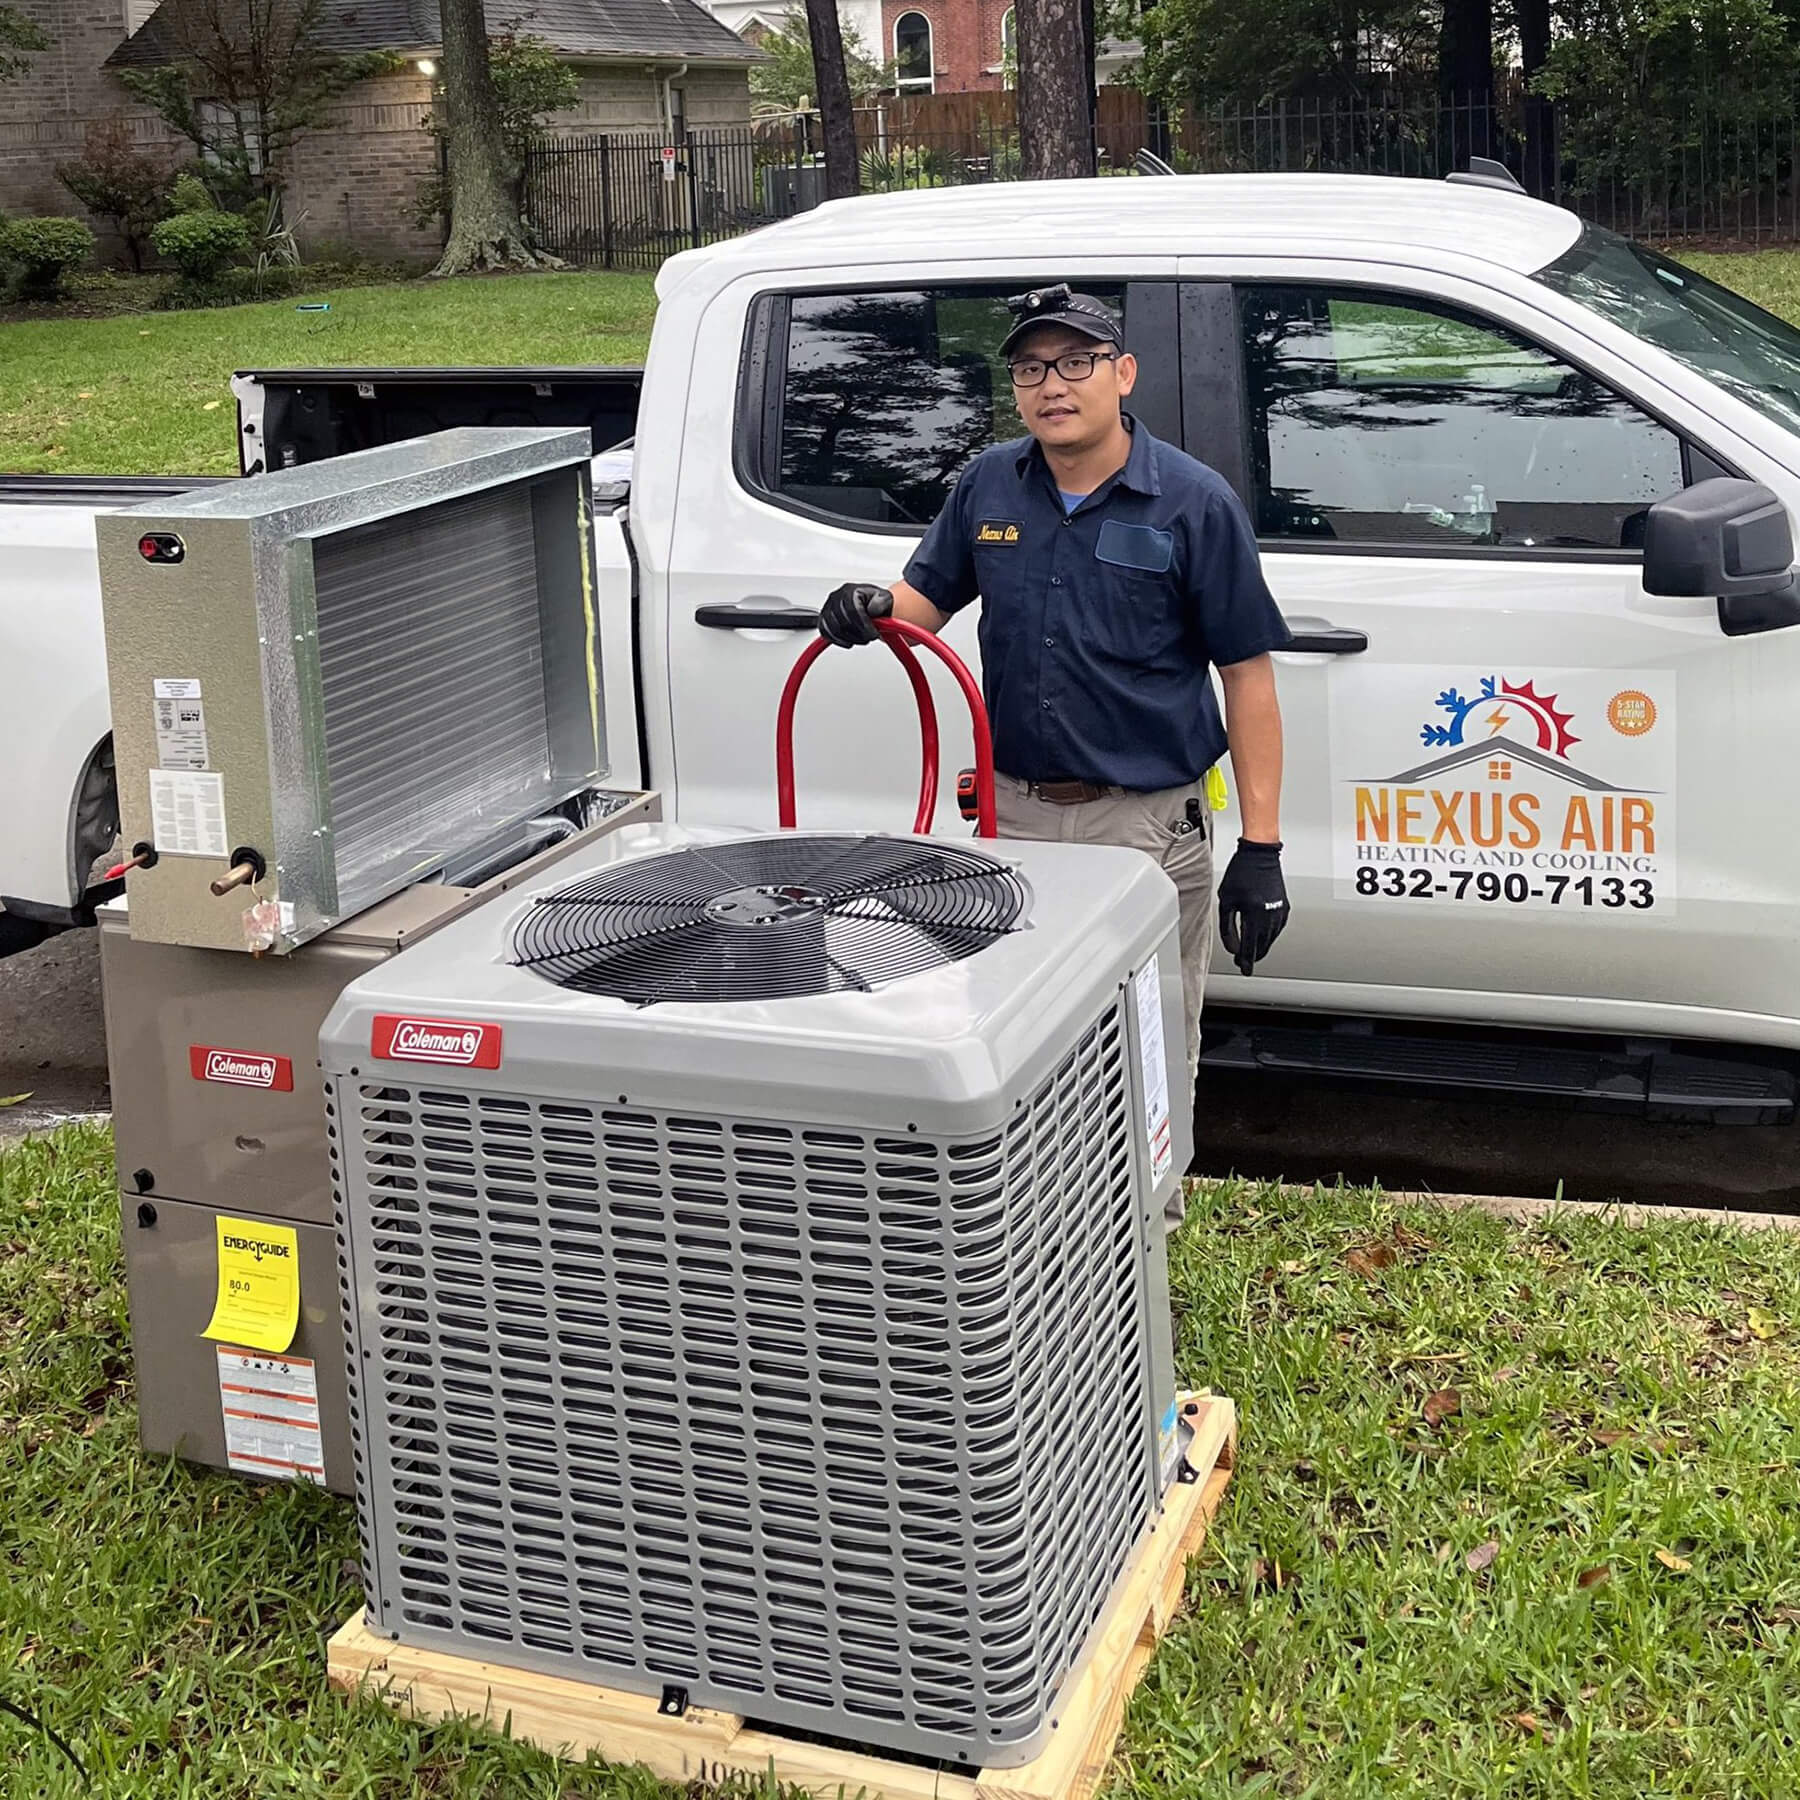 Nexus Air Heating & Cooling About Us Image